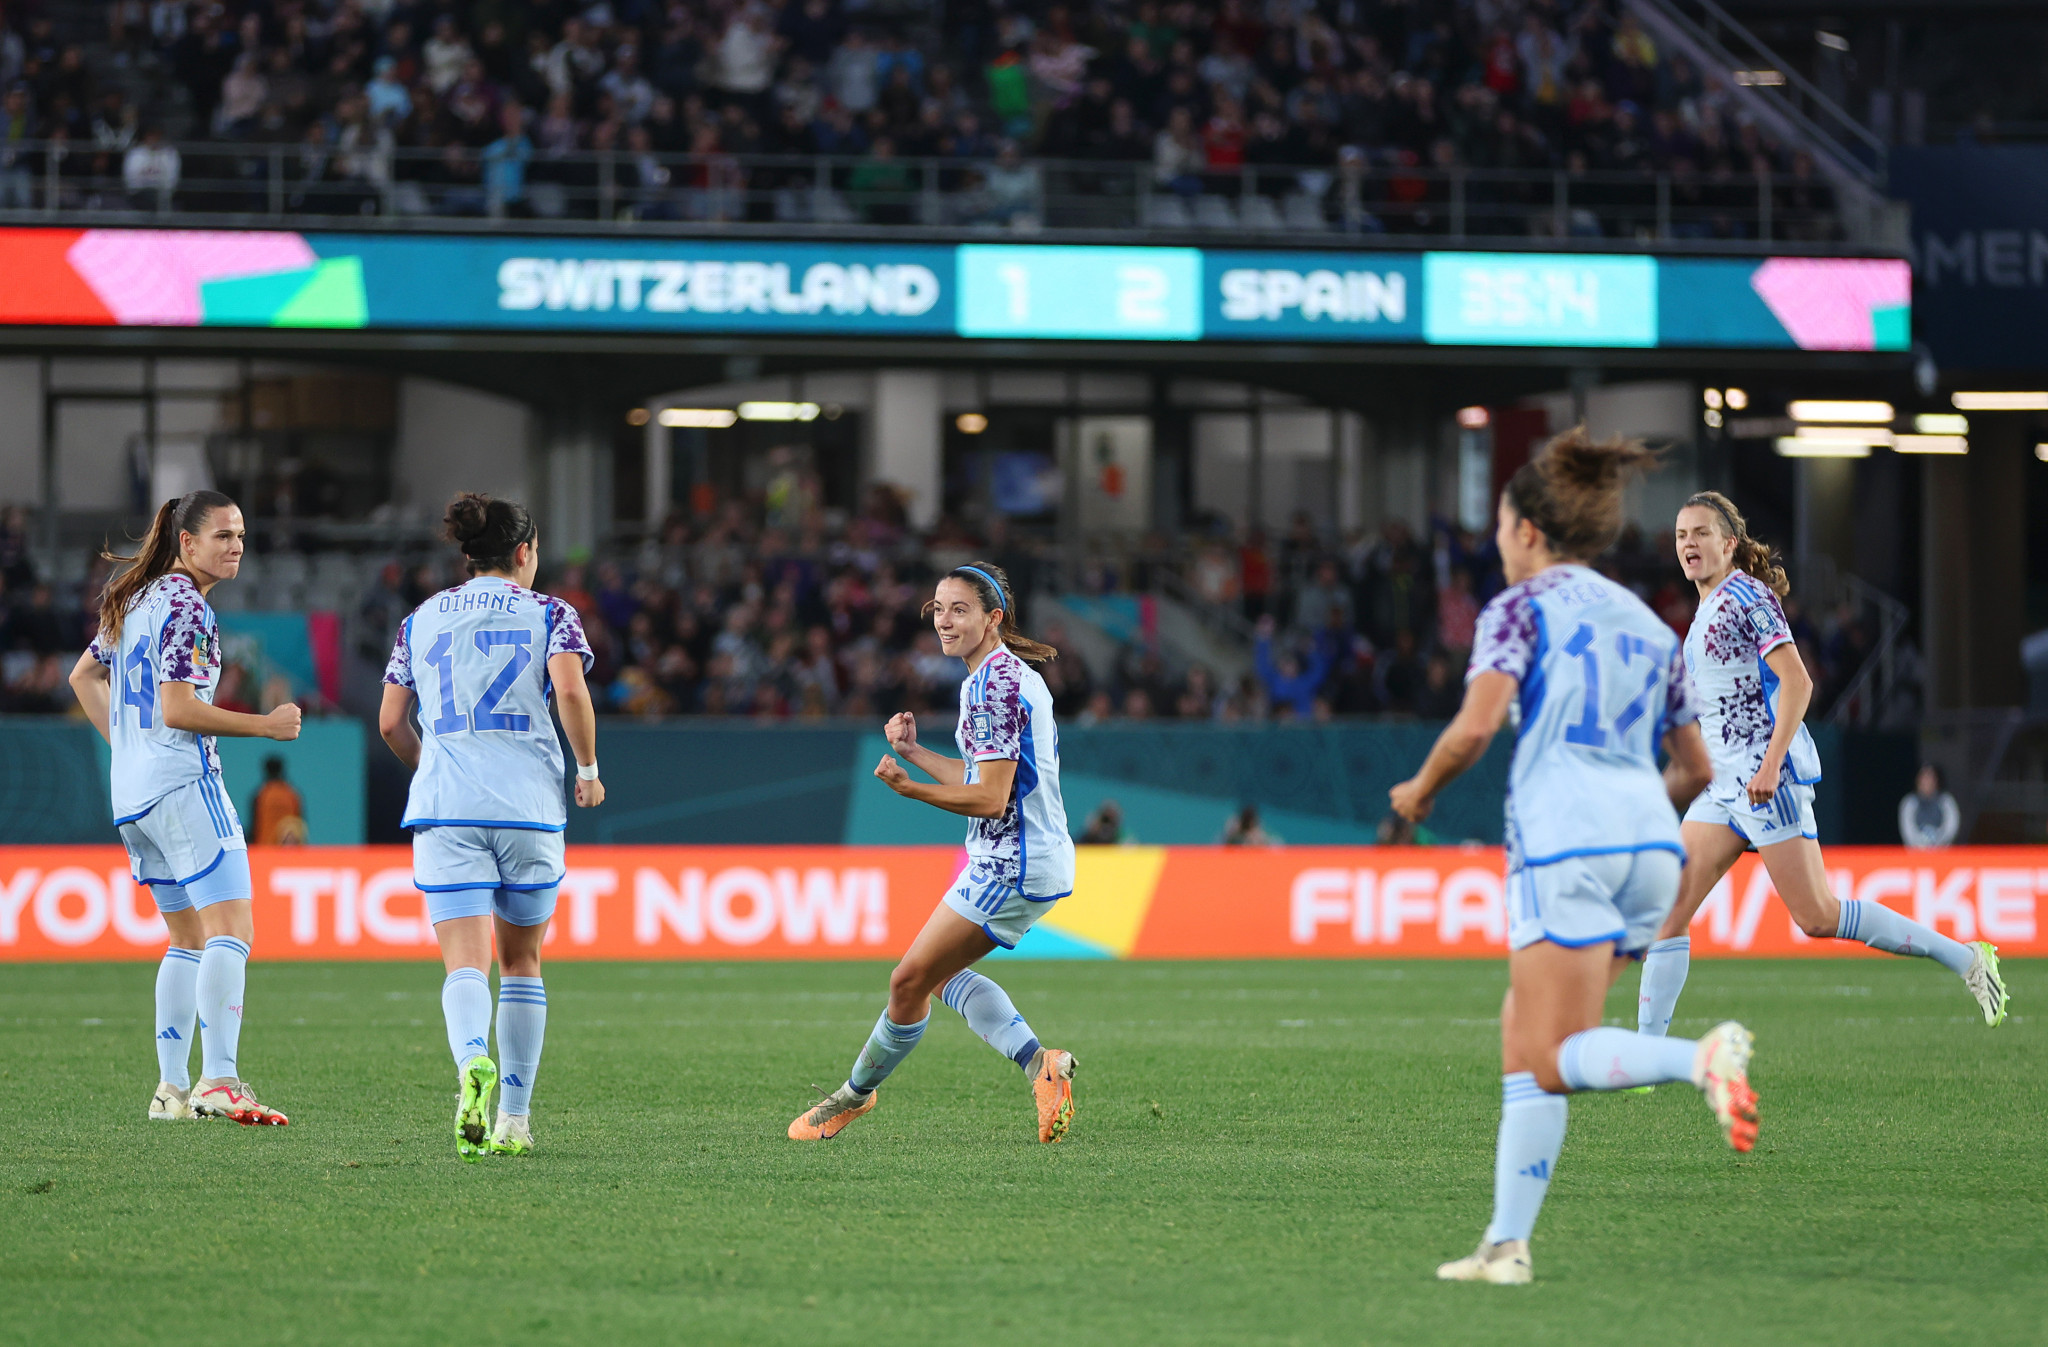 Spain and Japan register comfortable wins to reach quarter-finals at FIFA Women's World Cup